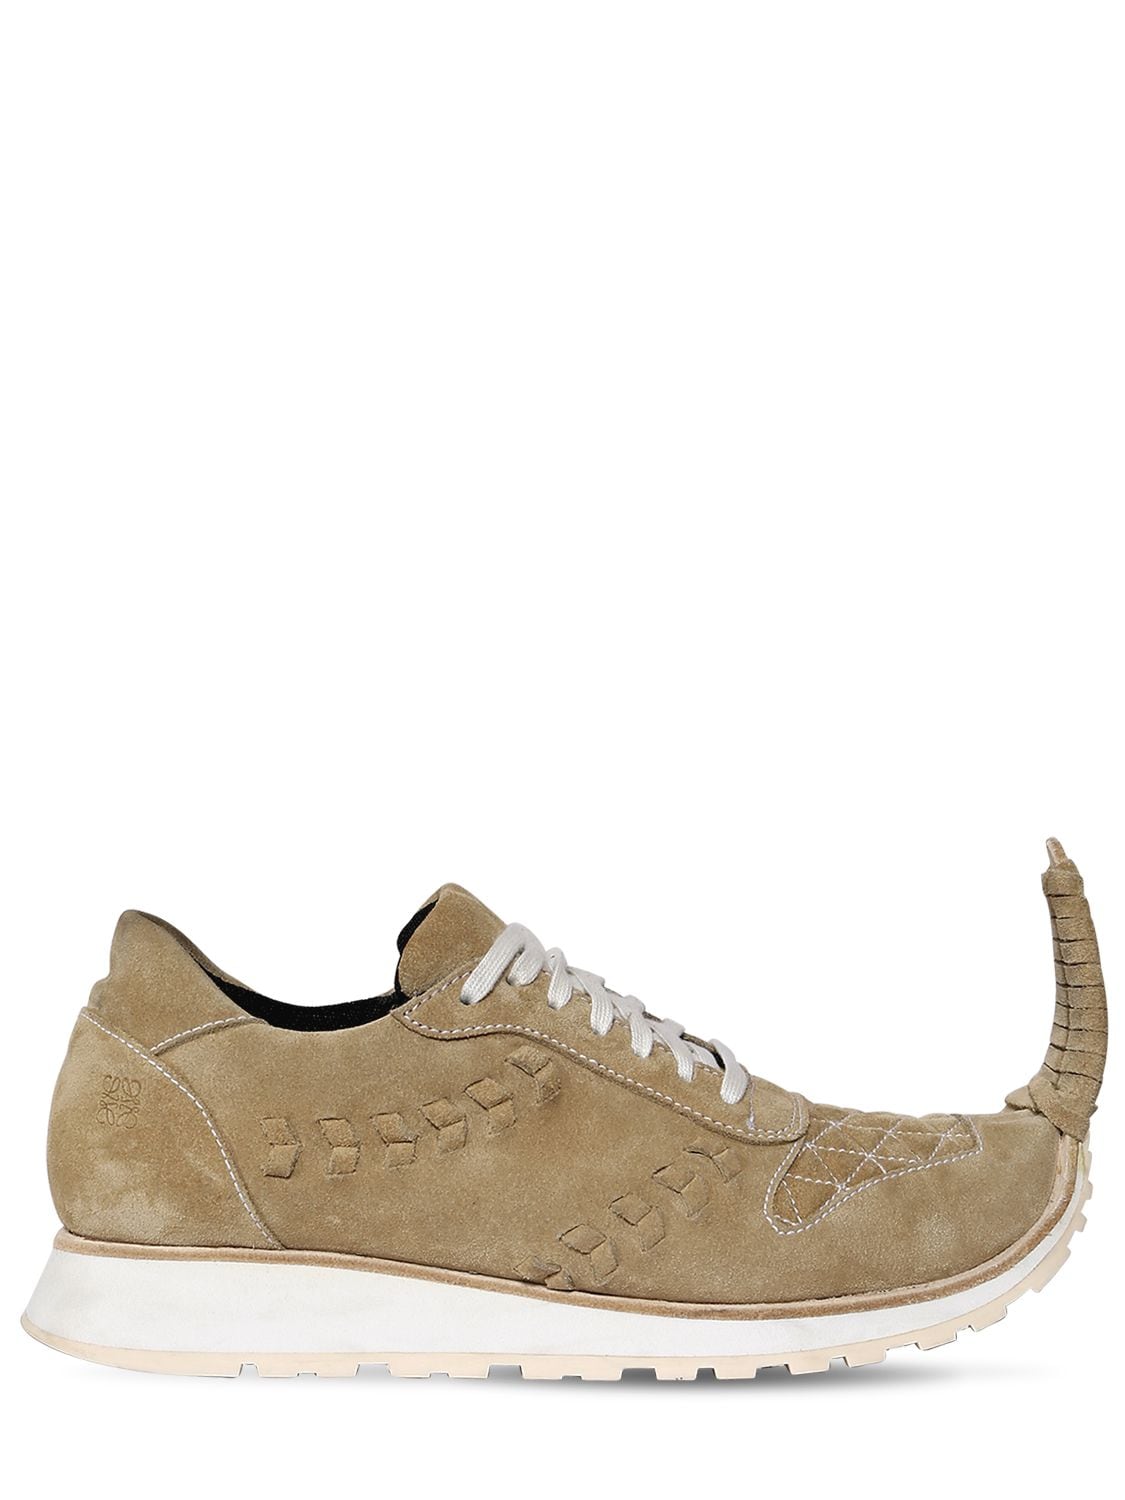 LOEWE 20MM POINTED SUEDE SNEAKERS,67ILO5001-ODEzMA2